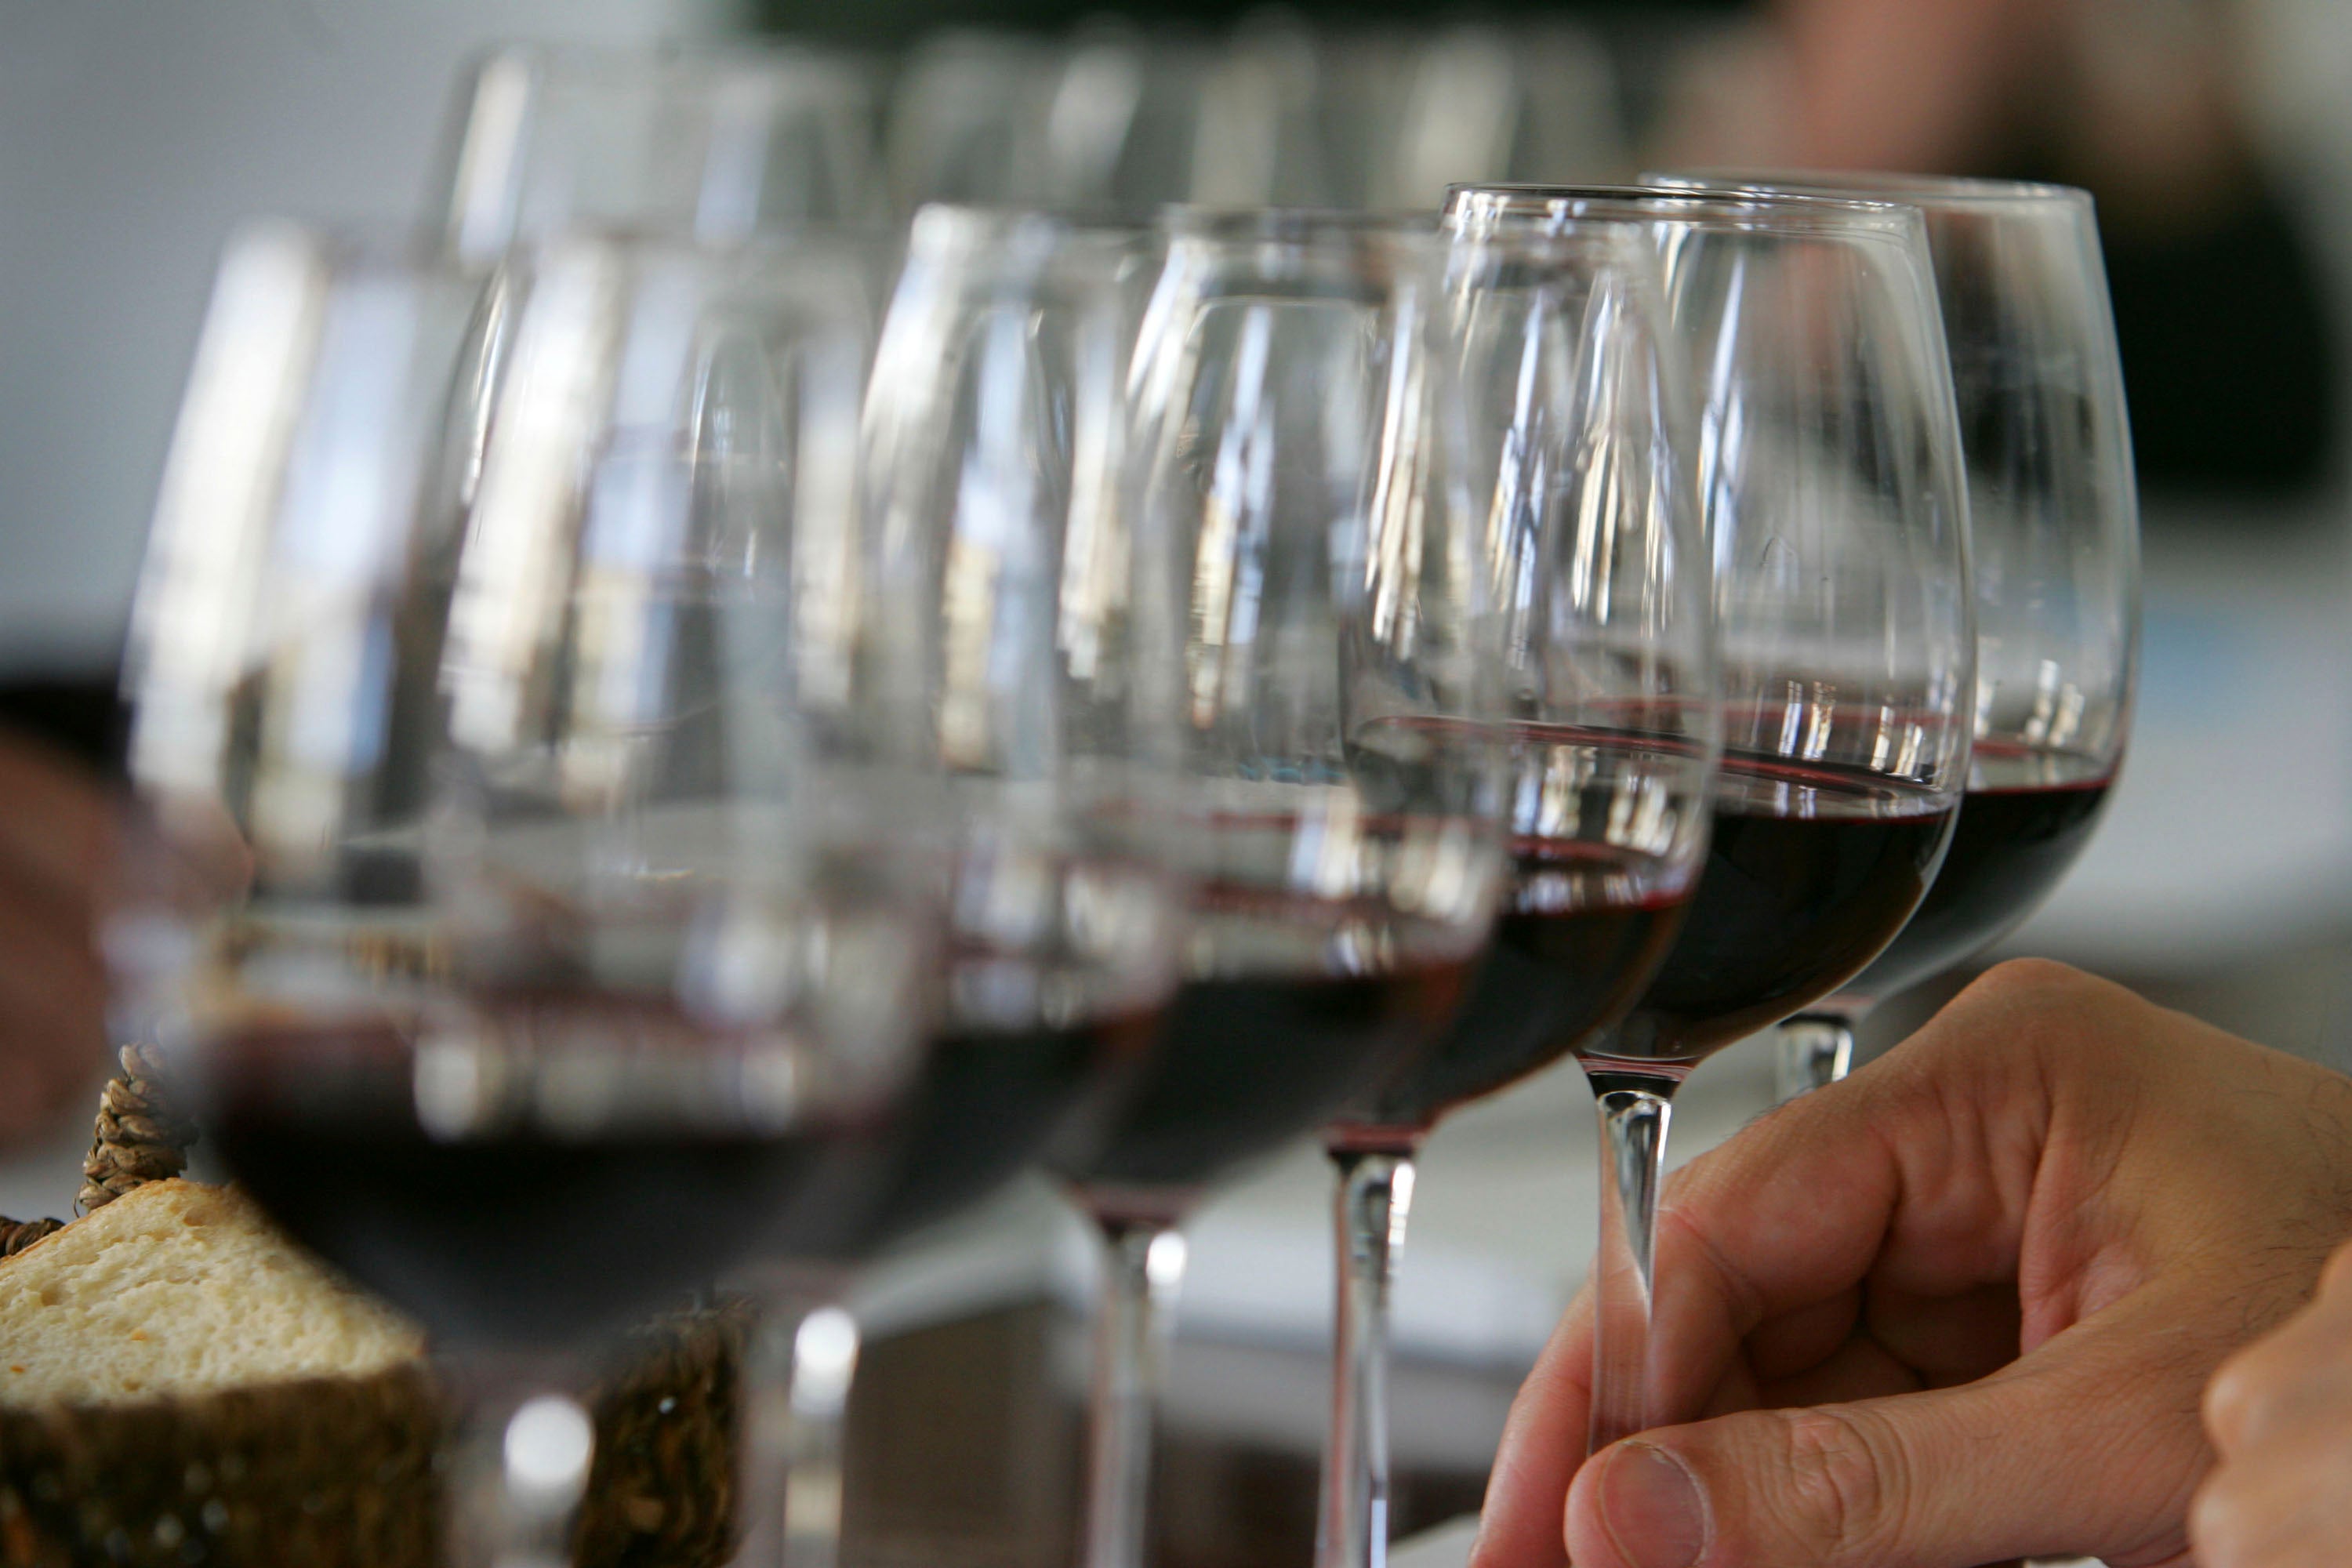 Red wine is rich in flavonoids